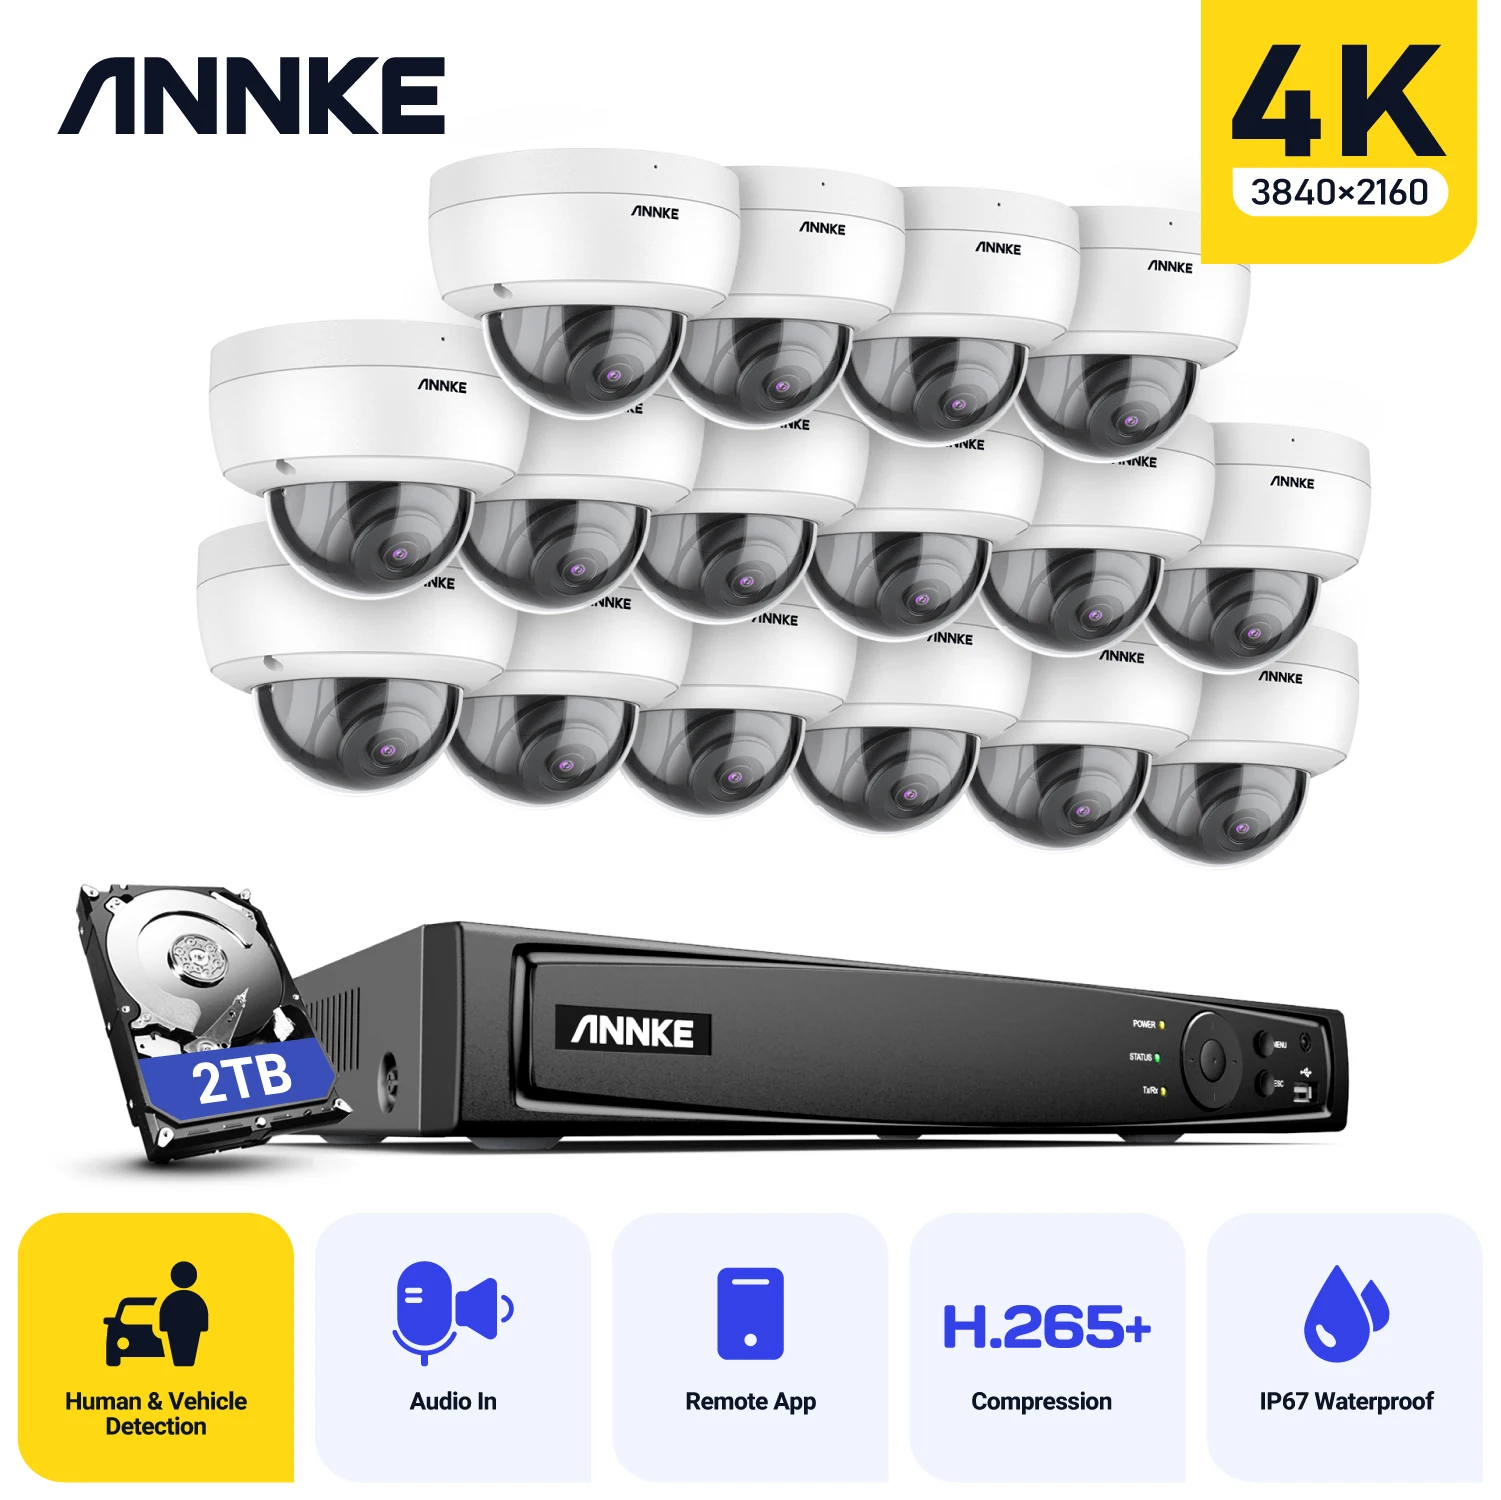 

ANNKE 16CH 4K Ultra HD POE Network Video Security System 8MP H.265+ NVR With 16pcs 8MP Weatherproof IP Camera CCTV Security Kit